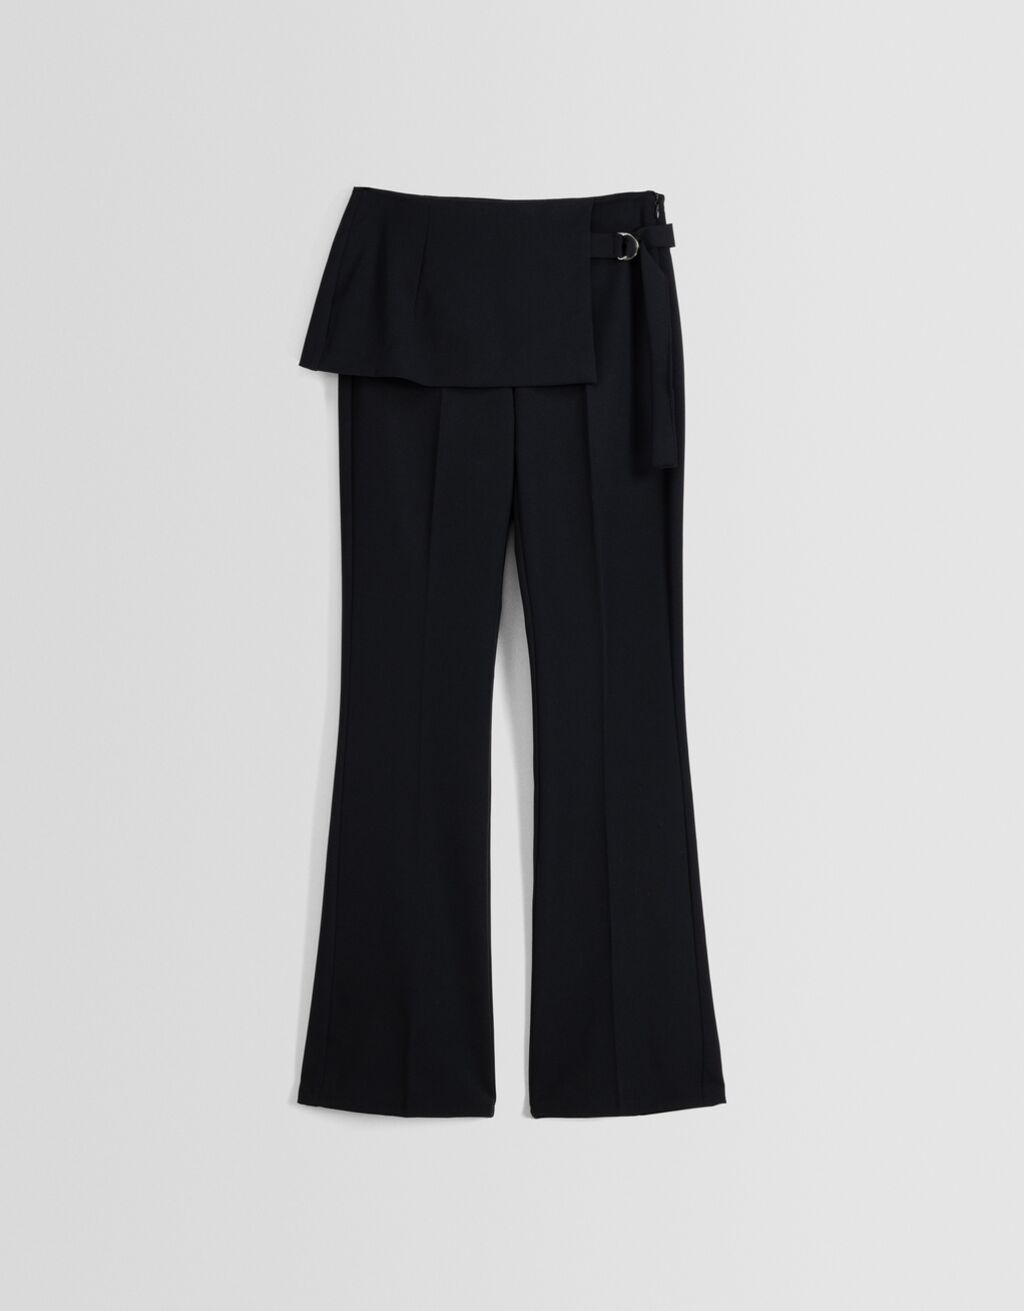 Tailored trousers with apron overlay